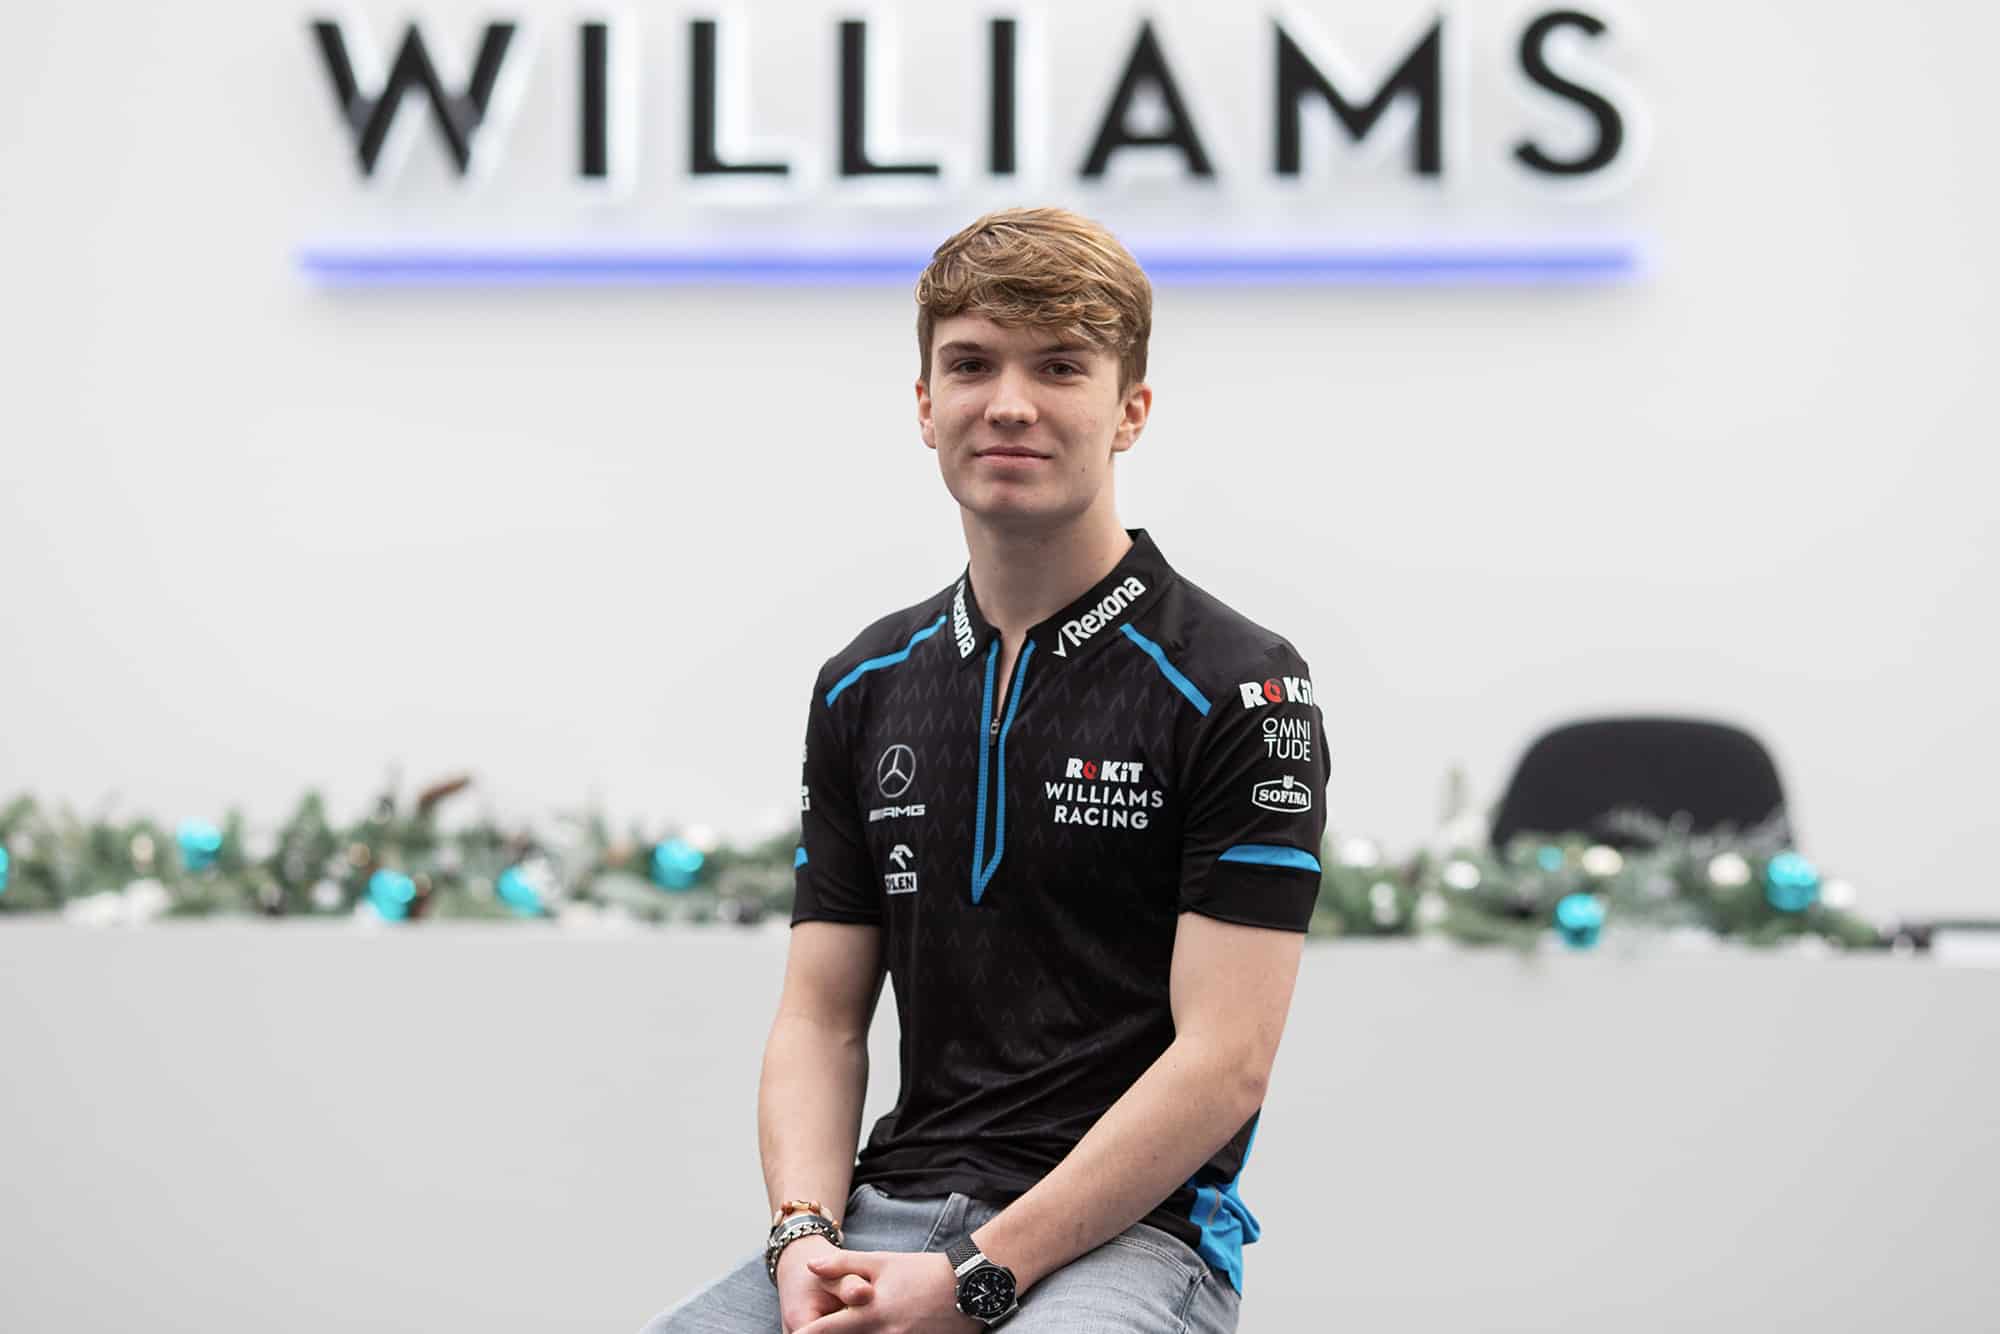 Dan Ticktum in front of a Williams sign as he announces his 2020 role as development driver